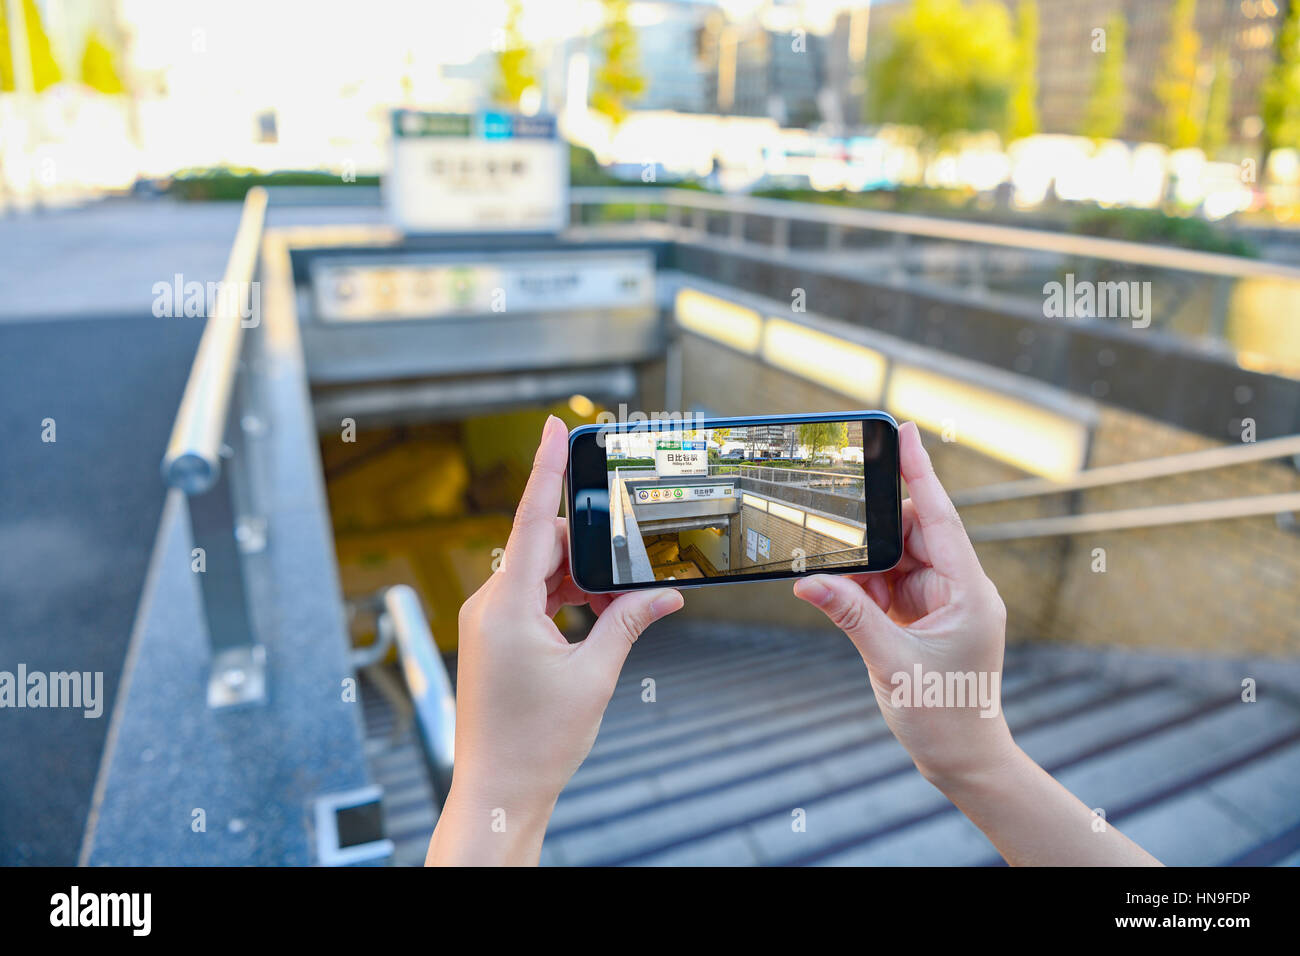 Japanese woman using augumented reality app on smartphone downtown Tokyo, Japan Stock Photo